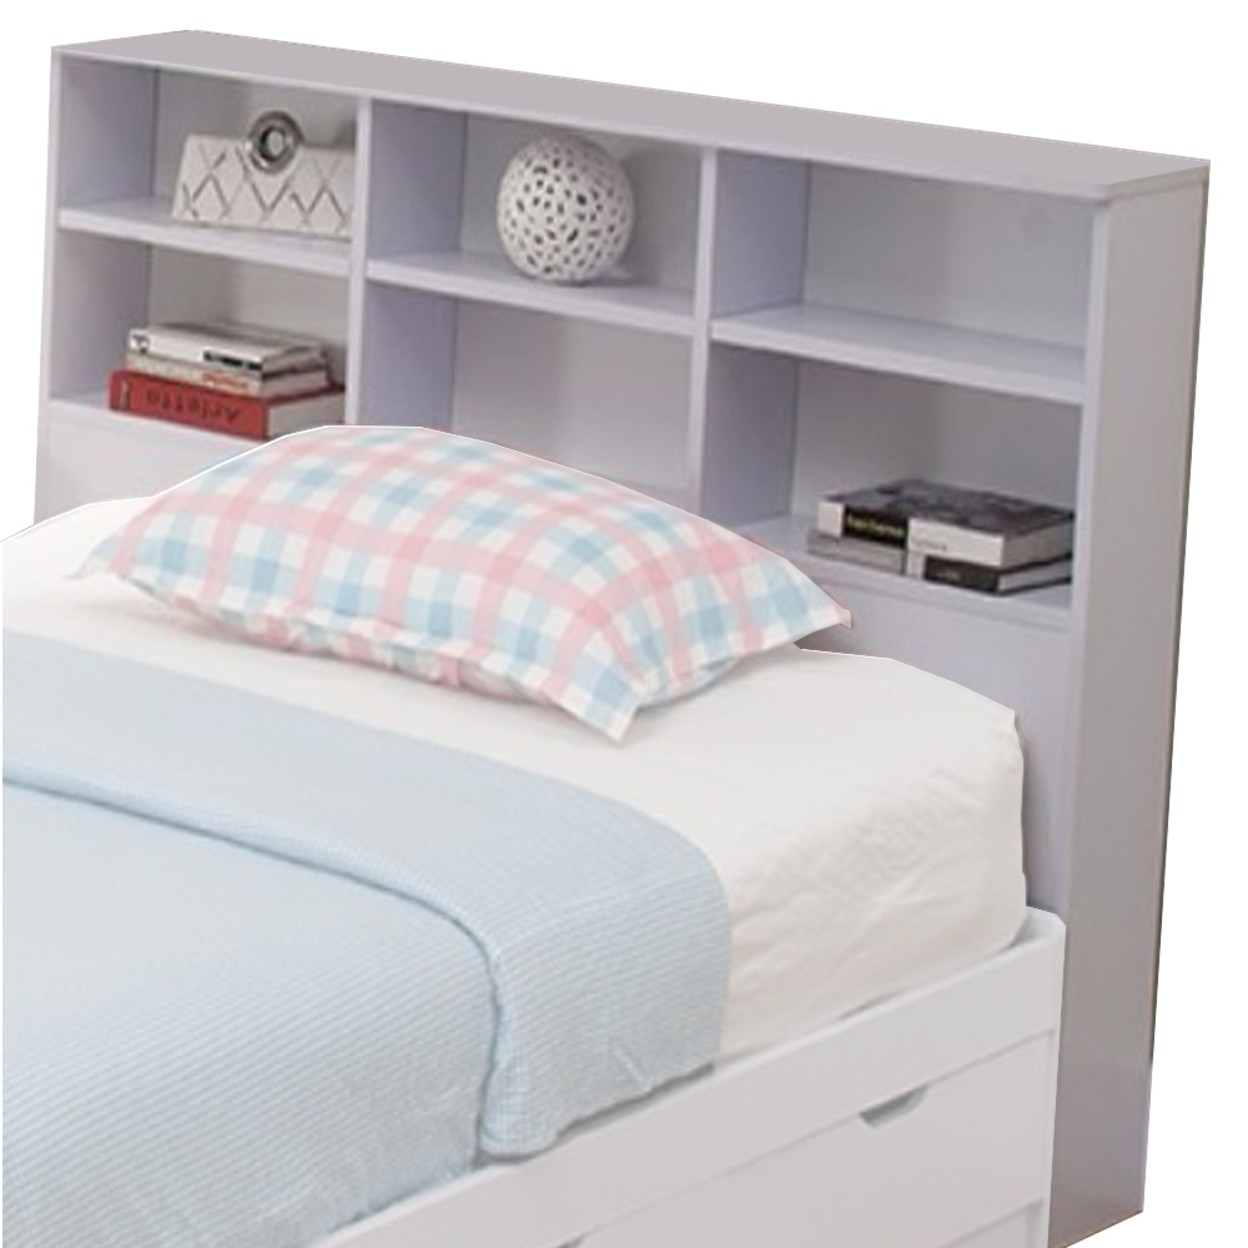 Wooden full size bookcase headboard with 6 open shelves